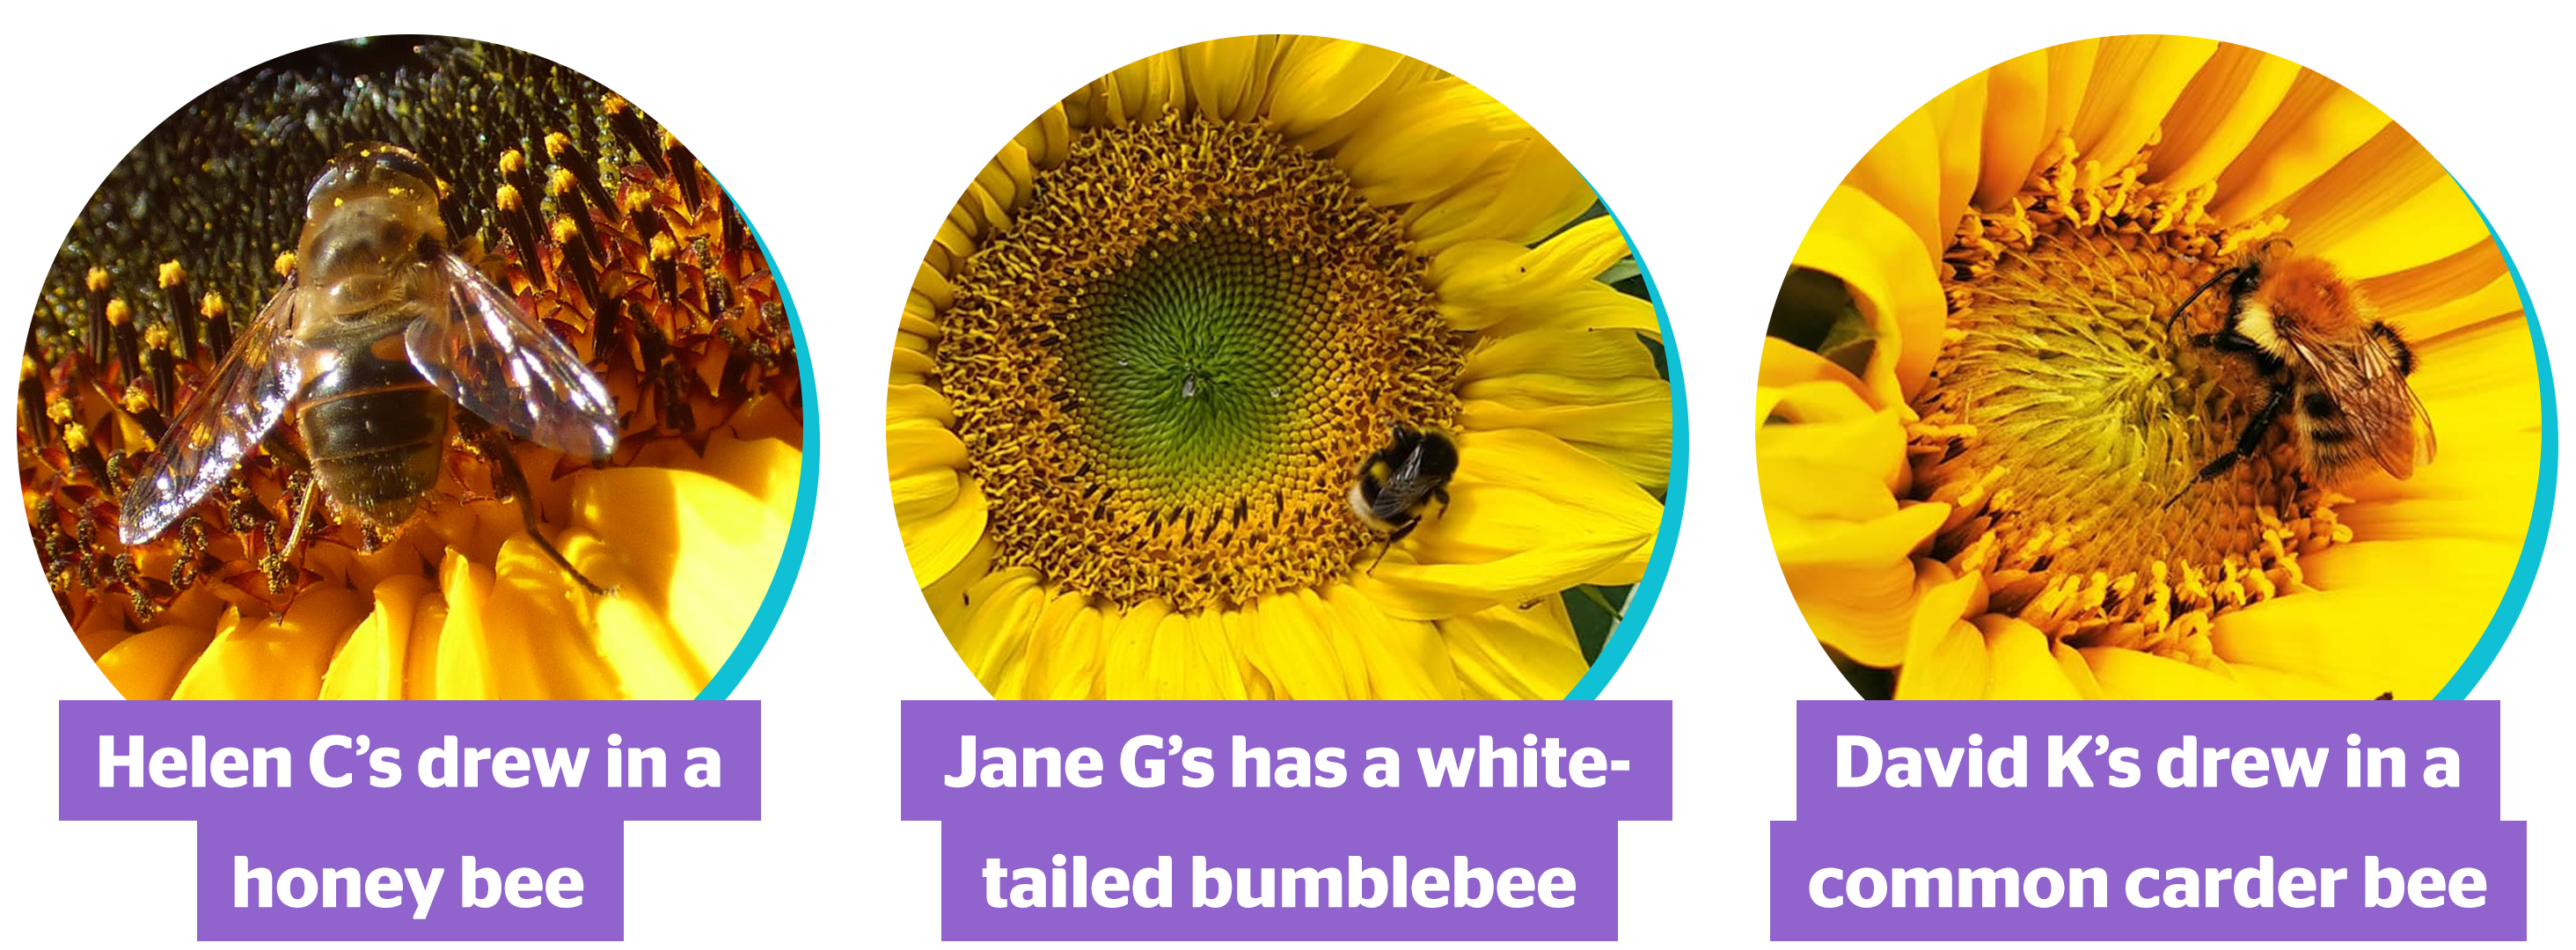 Helen C shared a photo of a honey bee. Jane G shared a white-tailed bumblebee. David K shared a common carder bee.